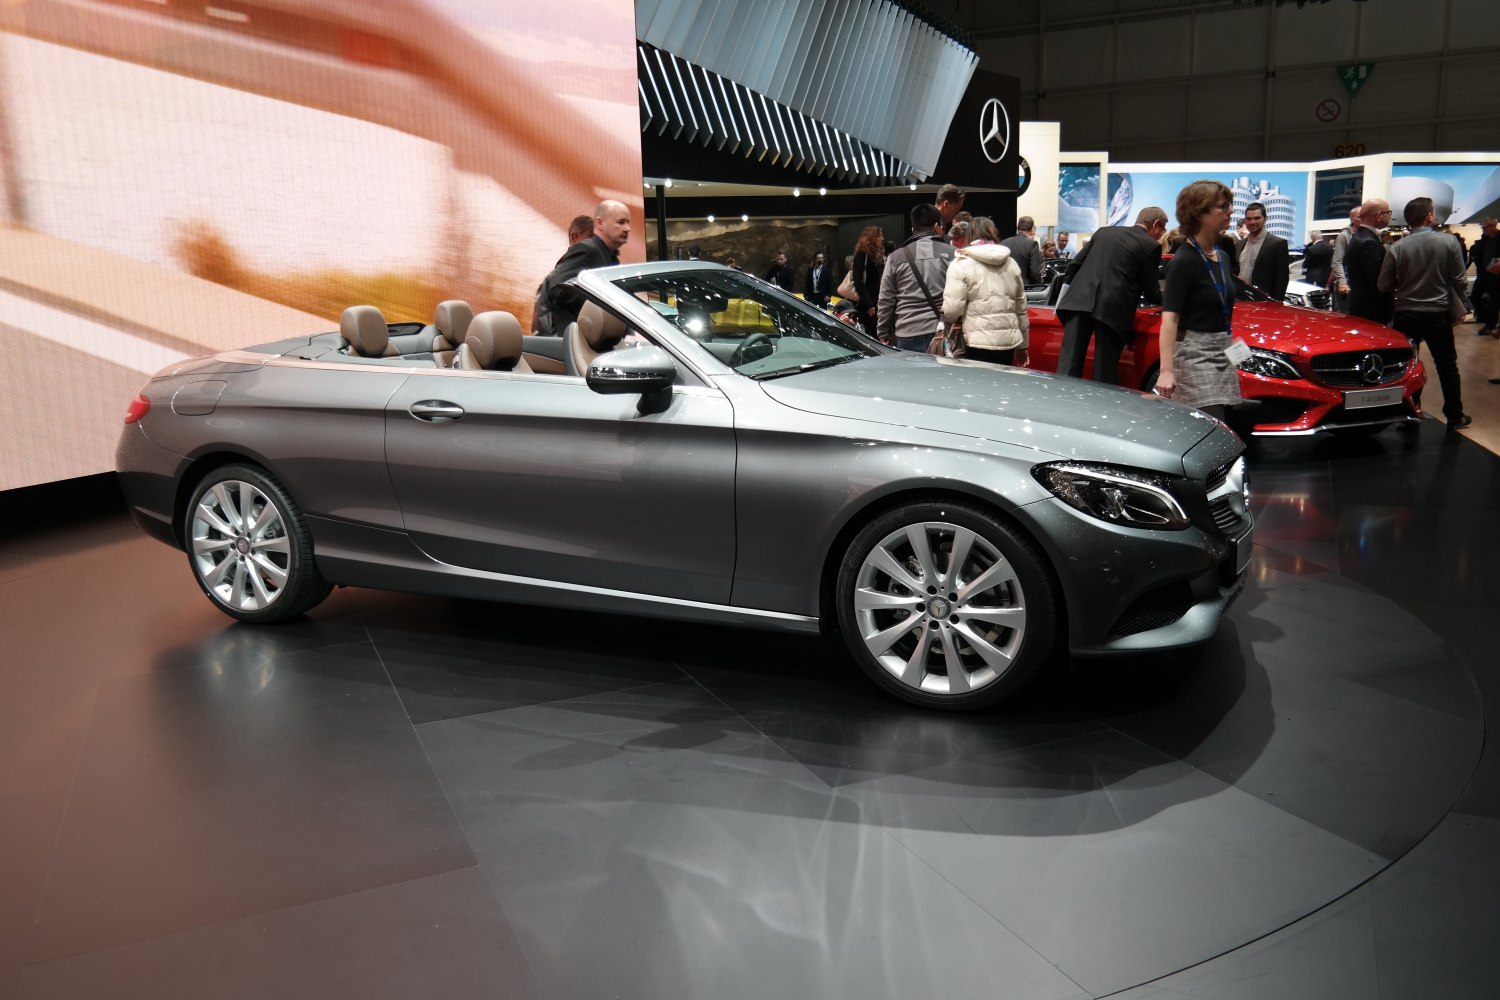 https://totalrenting.es/wp-content/uploads/2022/10/mercedes-benz-clase-c-cabrio-a205-2016-c-220d-170-cv-4matic-9g-tronic-cabriolet.png